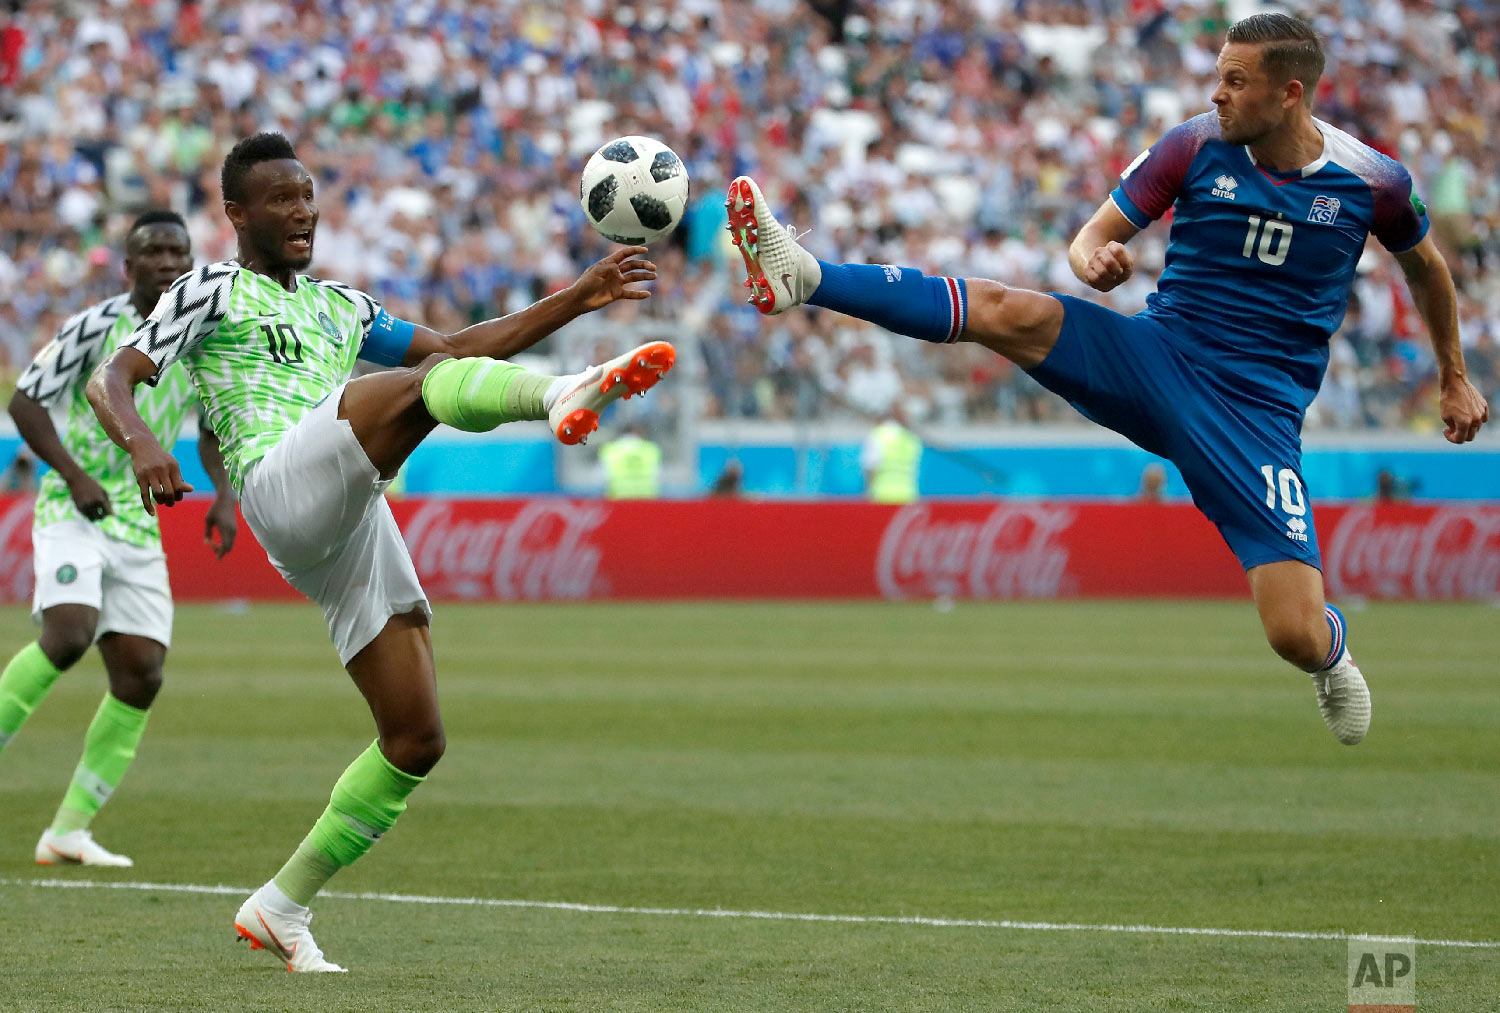  Nigeria's John Obi Mikel, left, and Iceland's Gylfi Sigurdsson compete for the ball during the group D match between Nigeria and Iceland at the 2018 soccer World Cup in the Volgograd Arena in Volgograd, Russia on June 22, 2018. (AP Photo/Darko Vojin